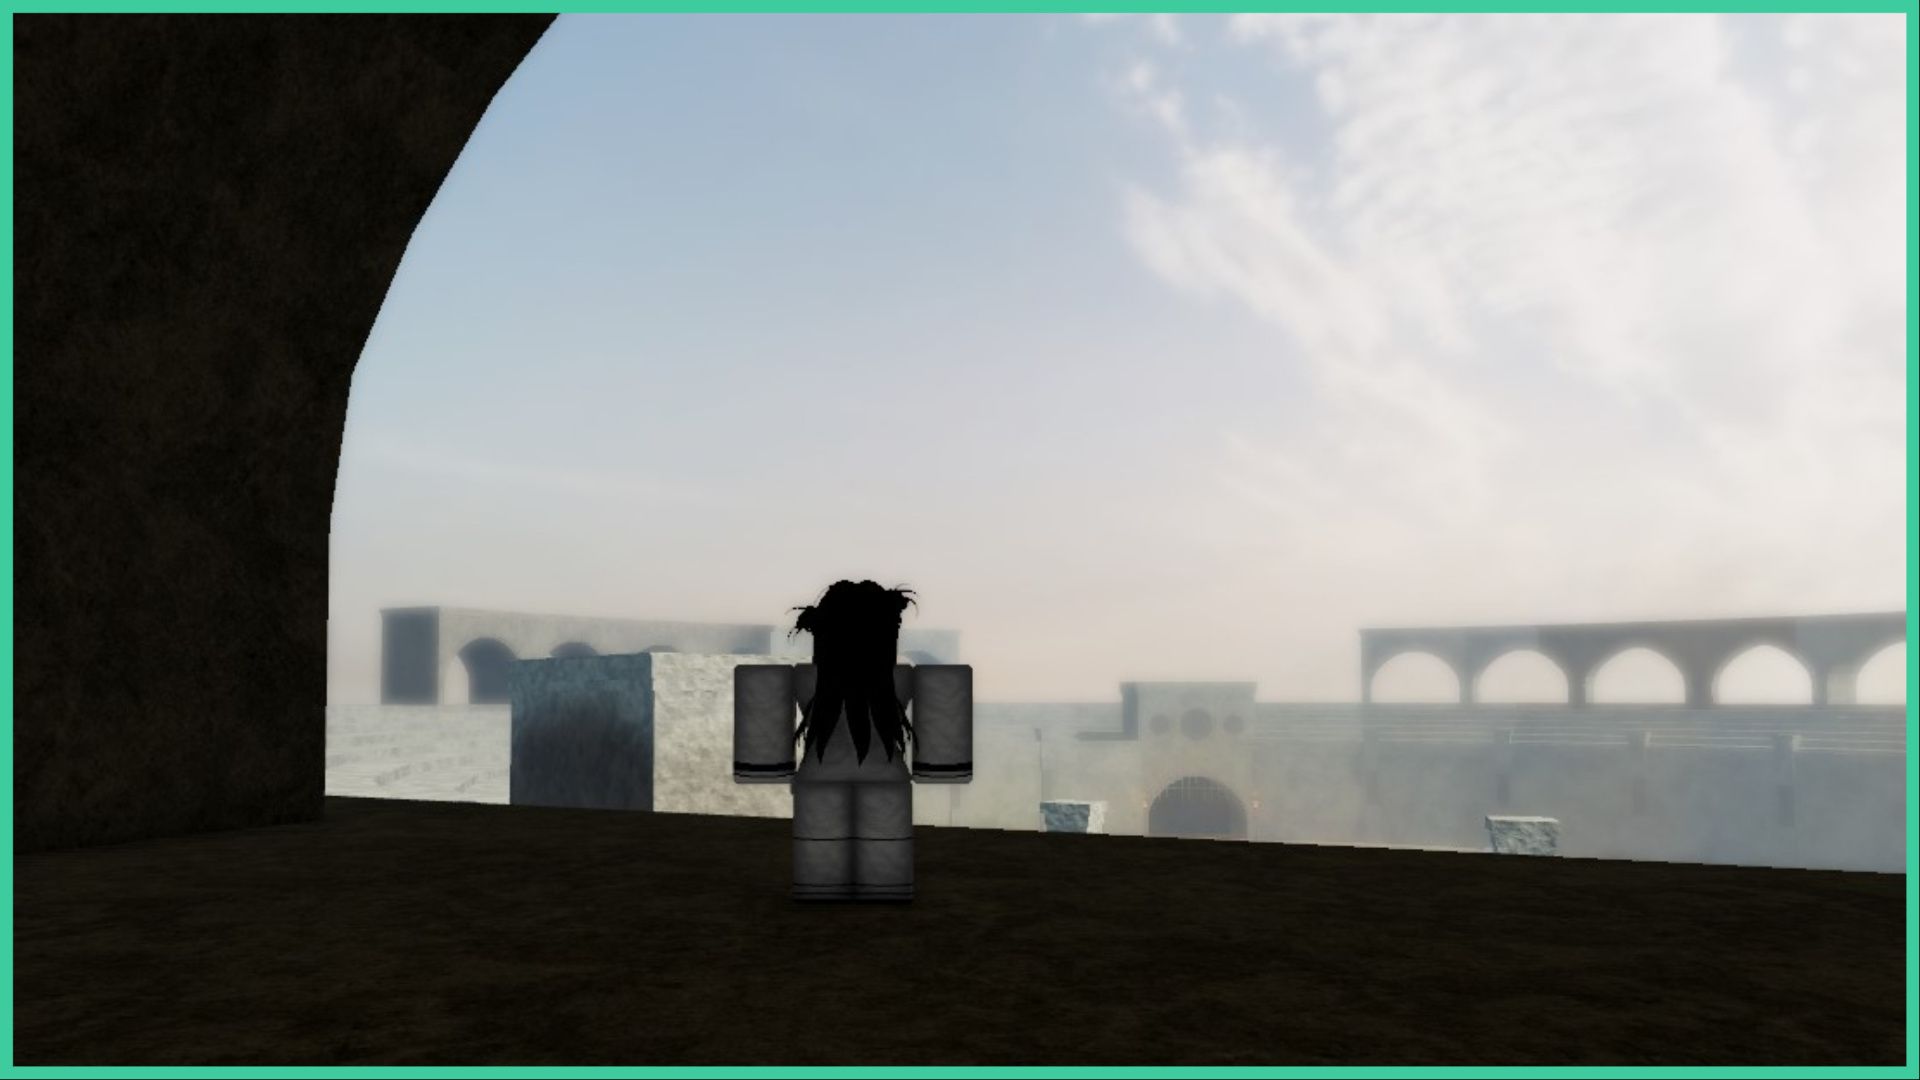 feature image for our type soul essences guide, the roblox player is looking out across the arena, with misty clouds in the sky as they stand under an arch that is casting a shadow over them and the ground